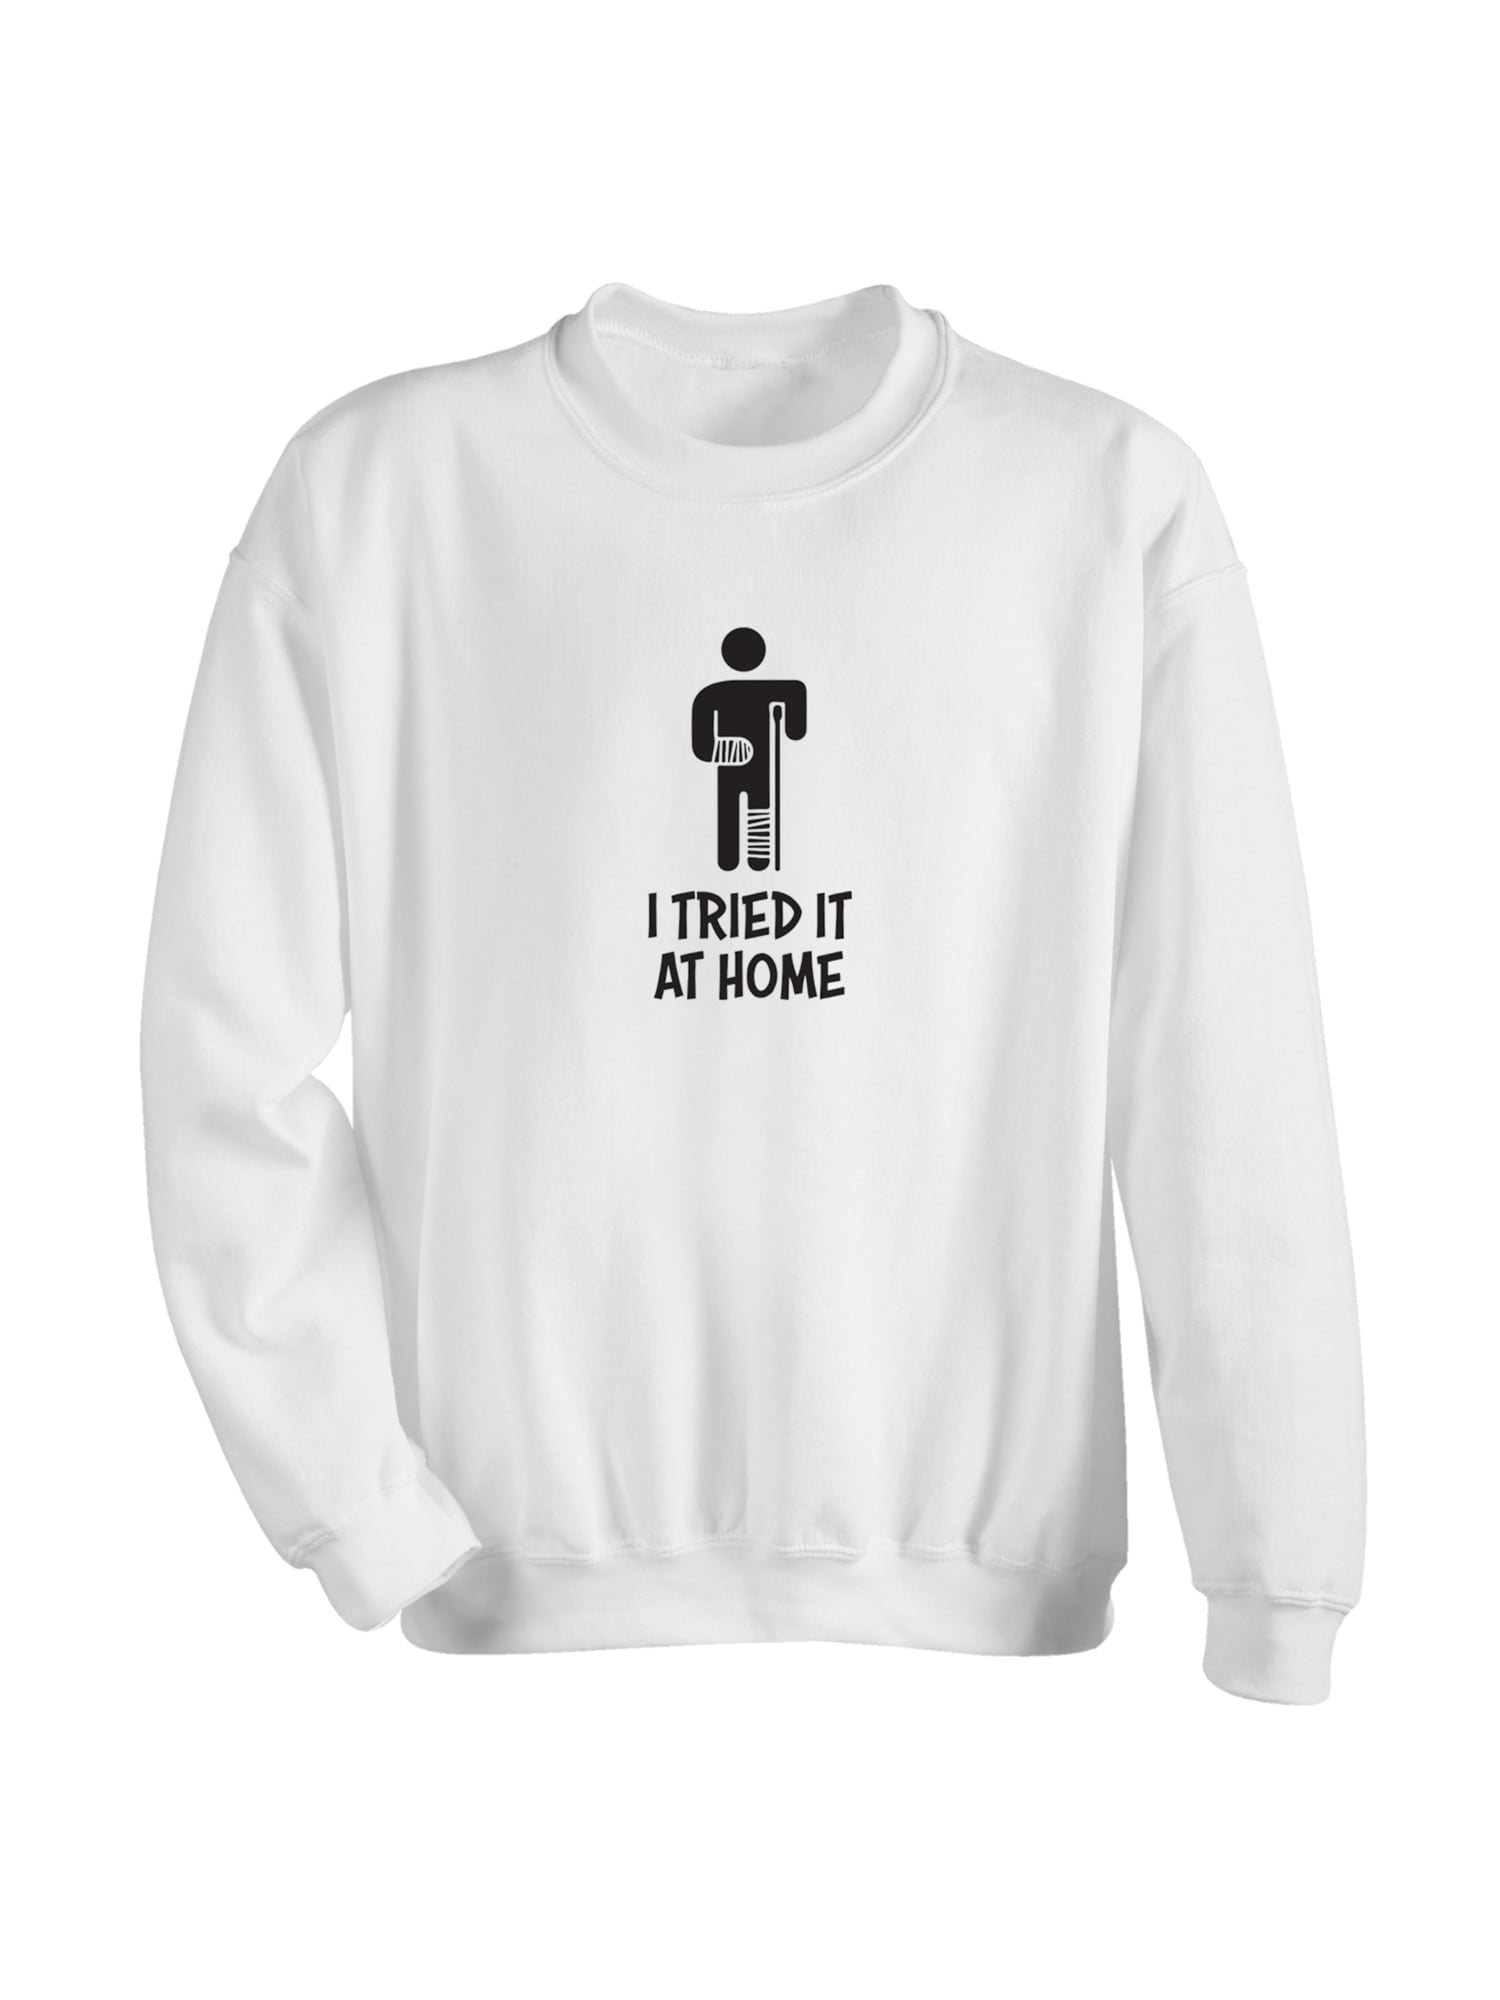 What On Earth What On Earth Men S Funny I Tried It At Home Sweatshirt Man In Cast White Xl Walmart Com Walmart Com